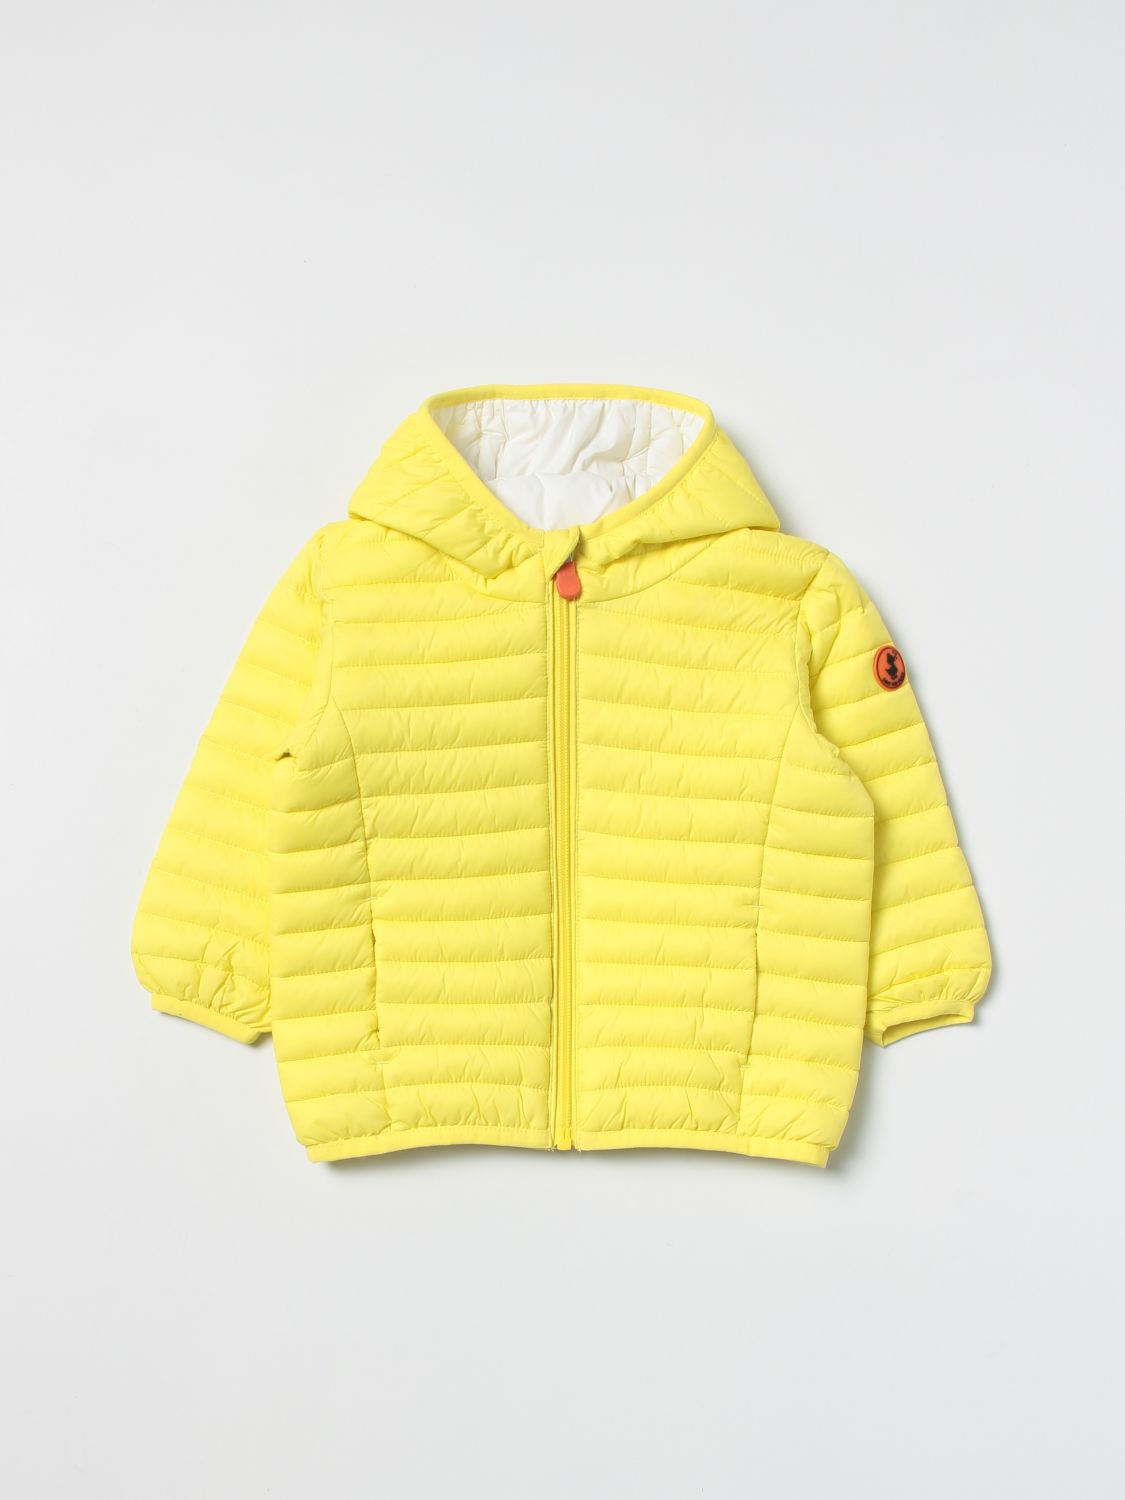 Jacke Save The Duck: Save The Duck Baby Jacke gelb 1